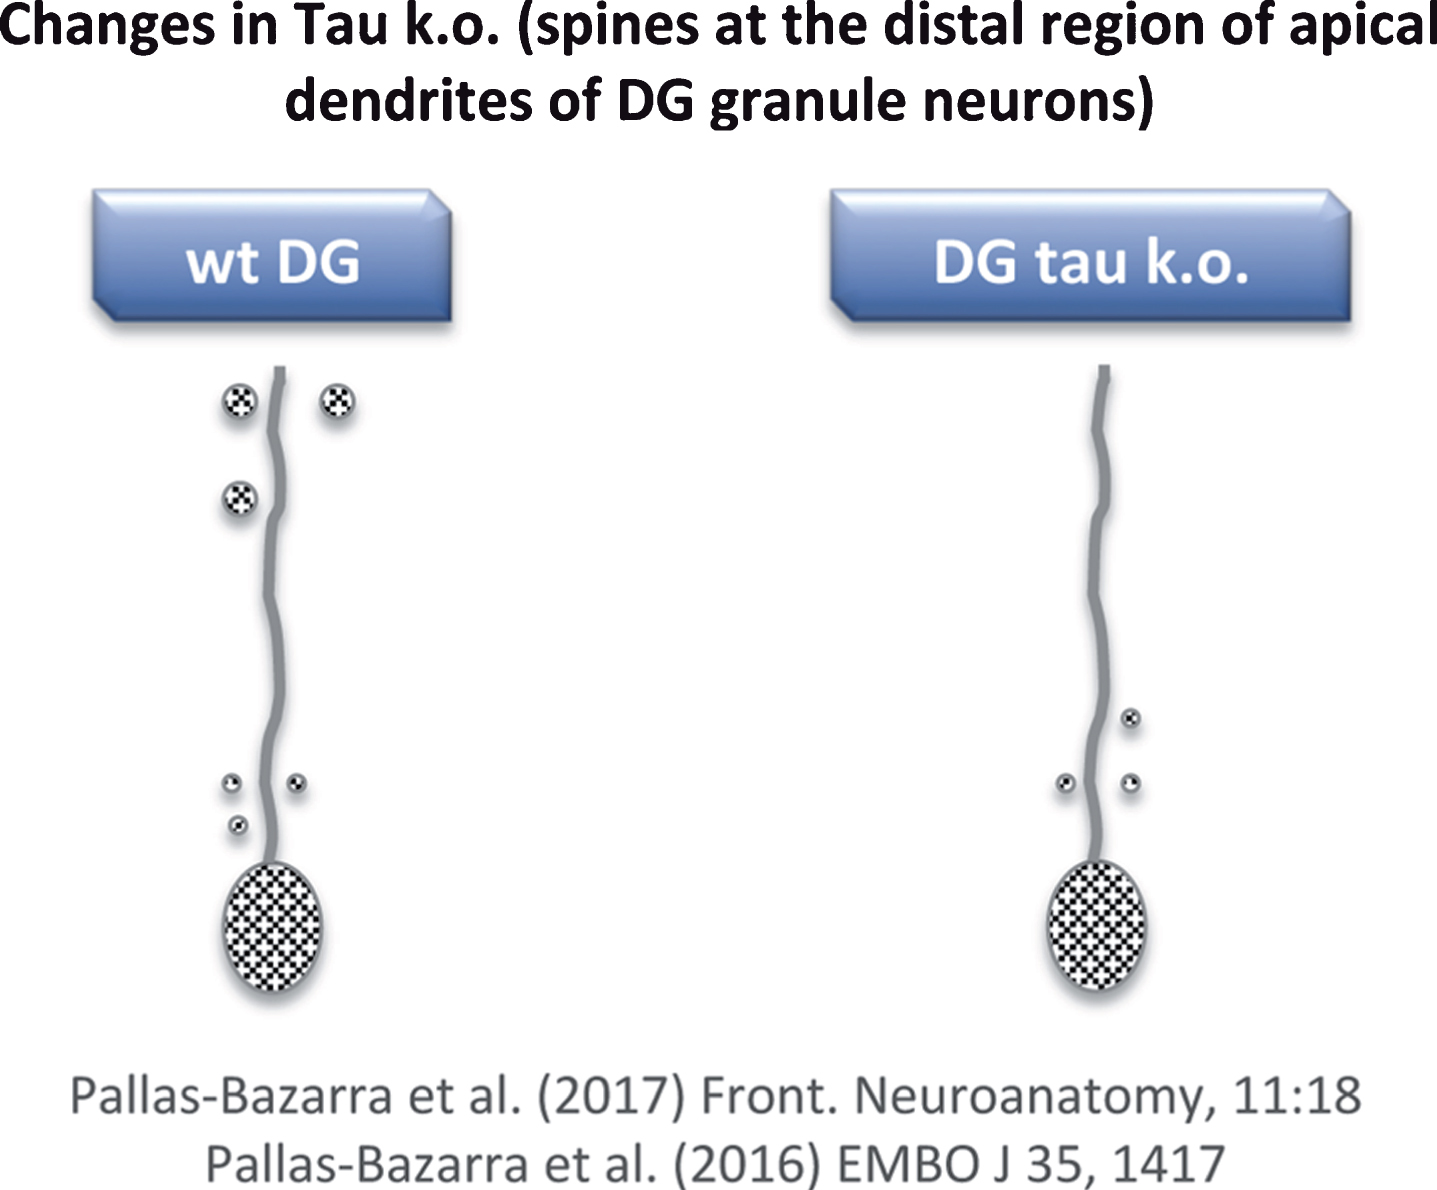 Loss of dendritic spines in some neurons of tau KO mice. Distal regions of apical dendrites of newborn granule neurons from tau KO mice show a decrease in dendritic spines compared to wild-type mice.